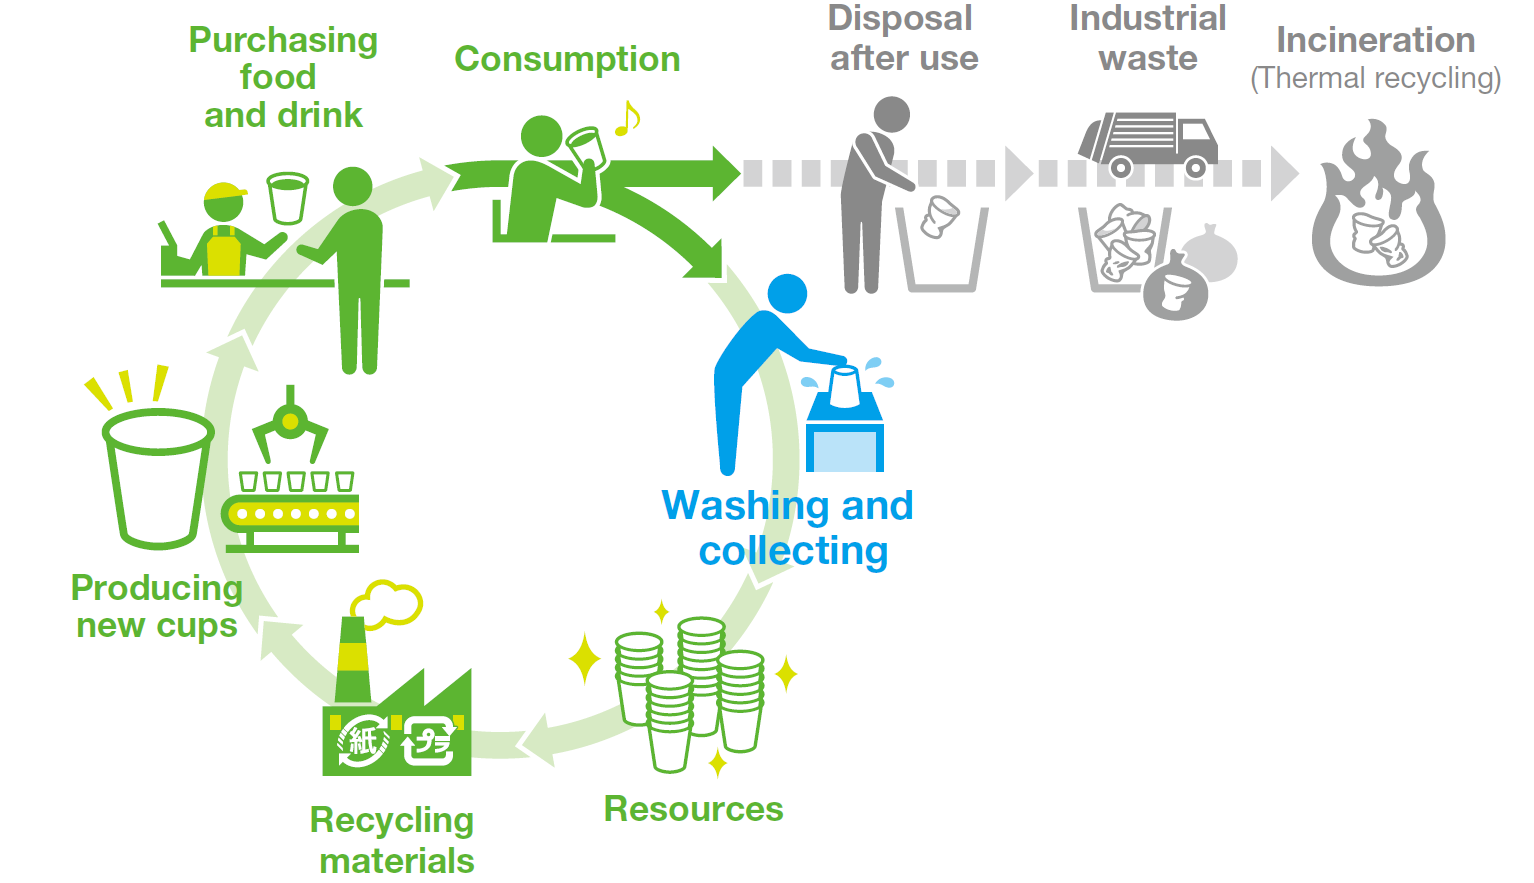 How the “CUP TO CUP Recycling System” works